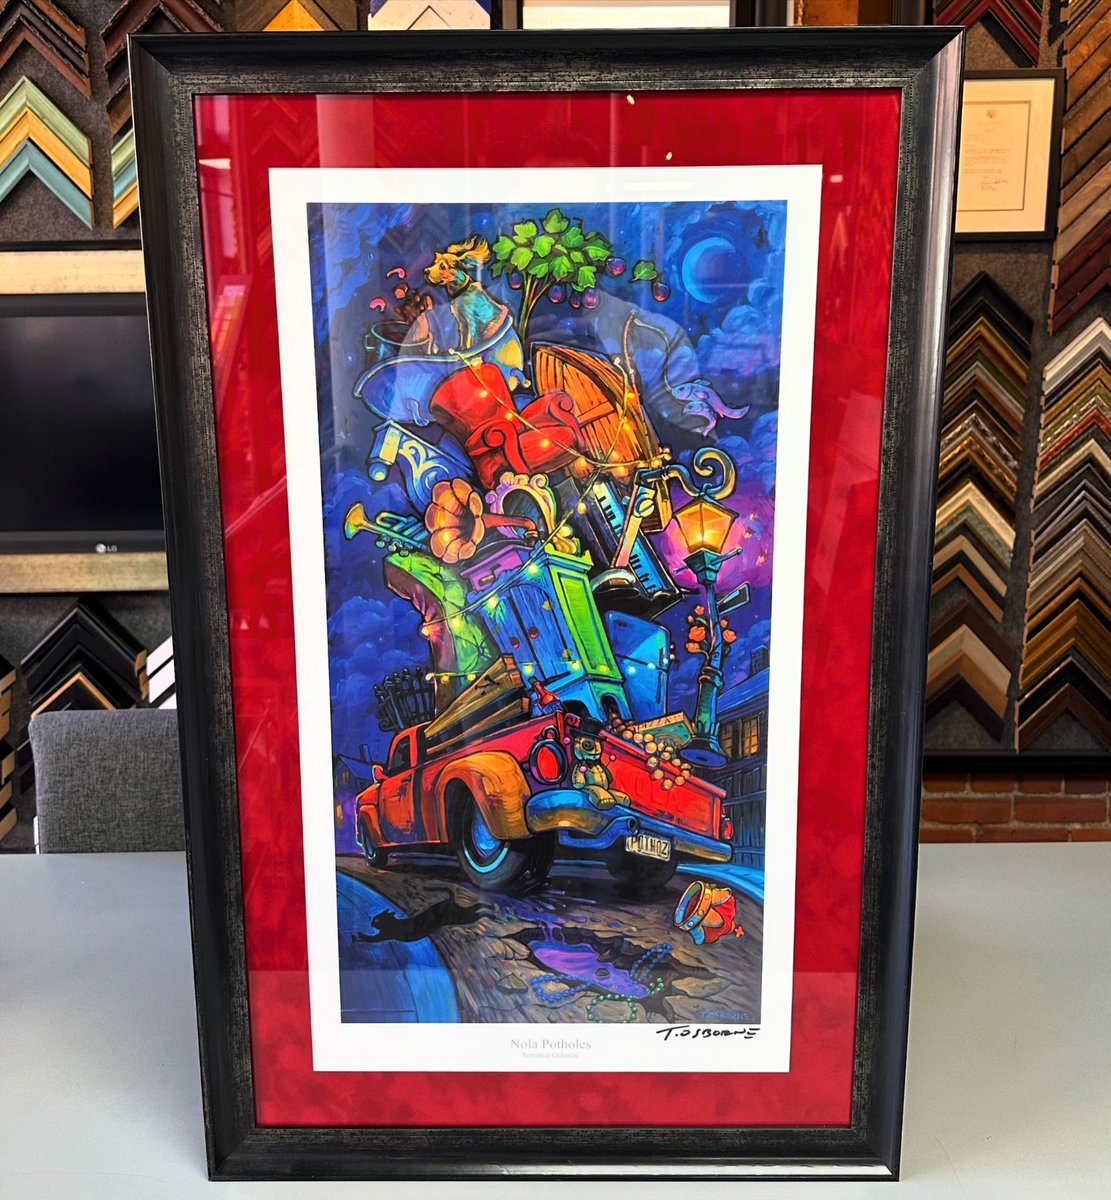 ‘Nola Potholes’ by @TerranceOsborne using suede matting, UV glass and frame by AMPF Moulding! #art #denver #colorado #pictureframing #customframing #5280customframing #terranceosborne #neworleans @truvueglazing @Crescent_CP